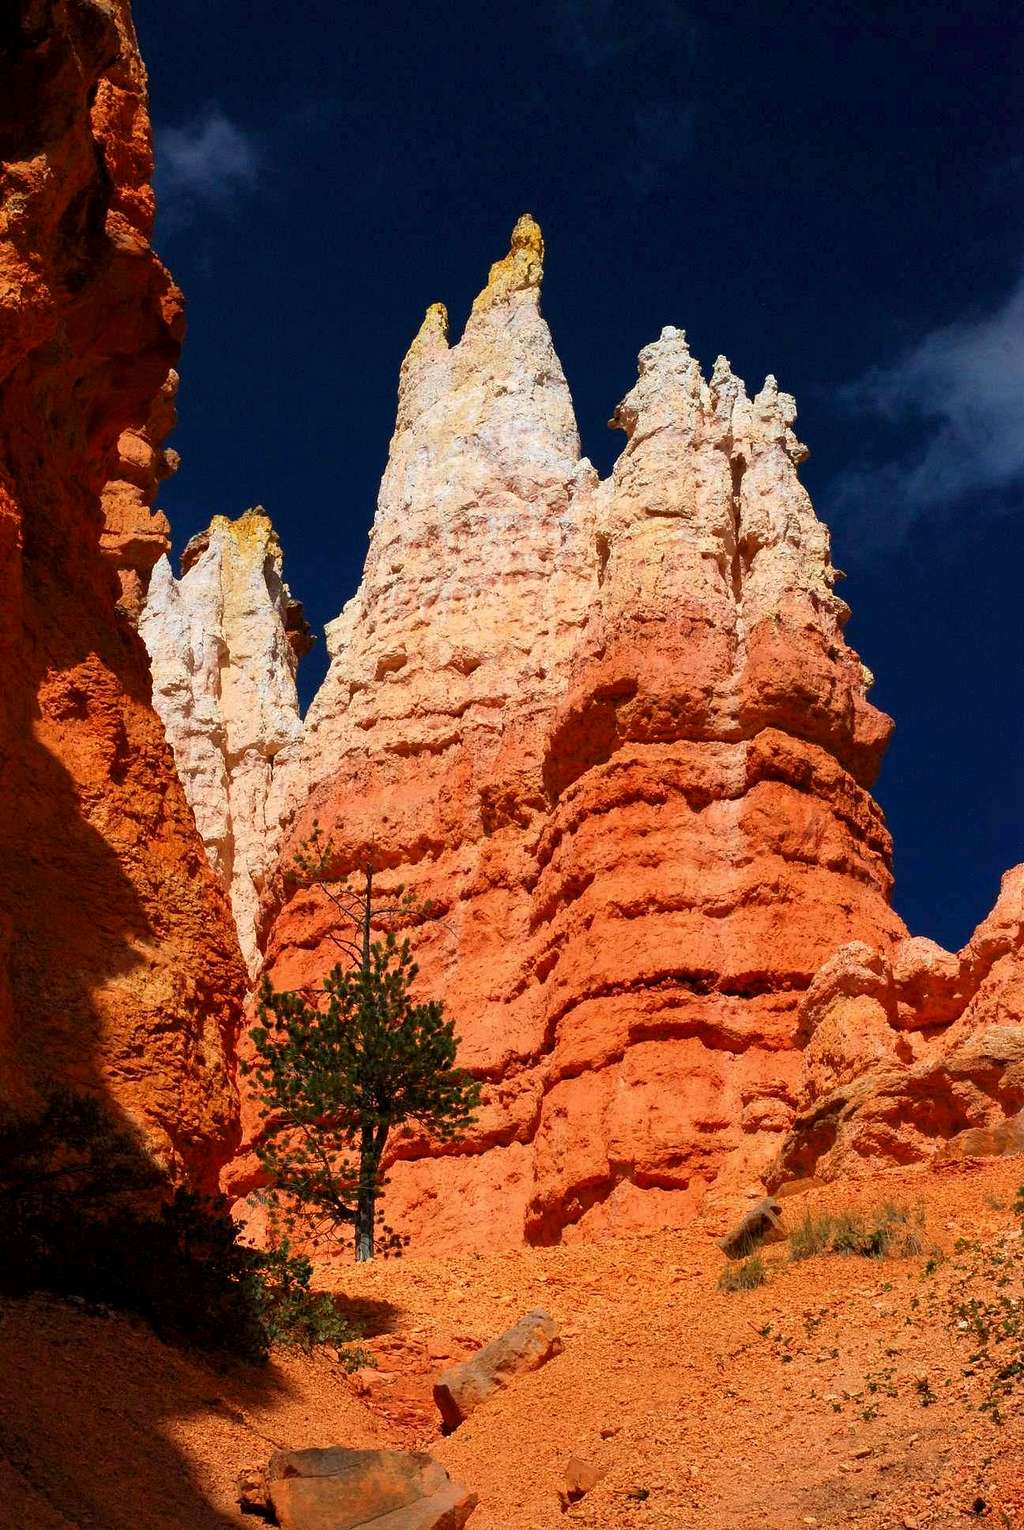 Gold-Capped Pinnacles